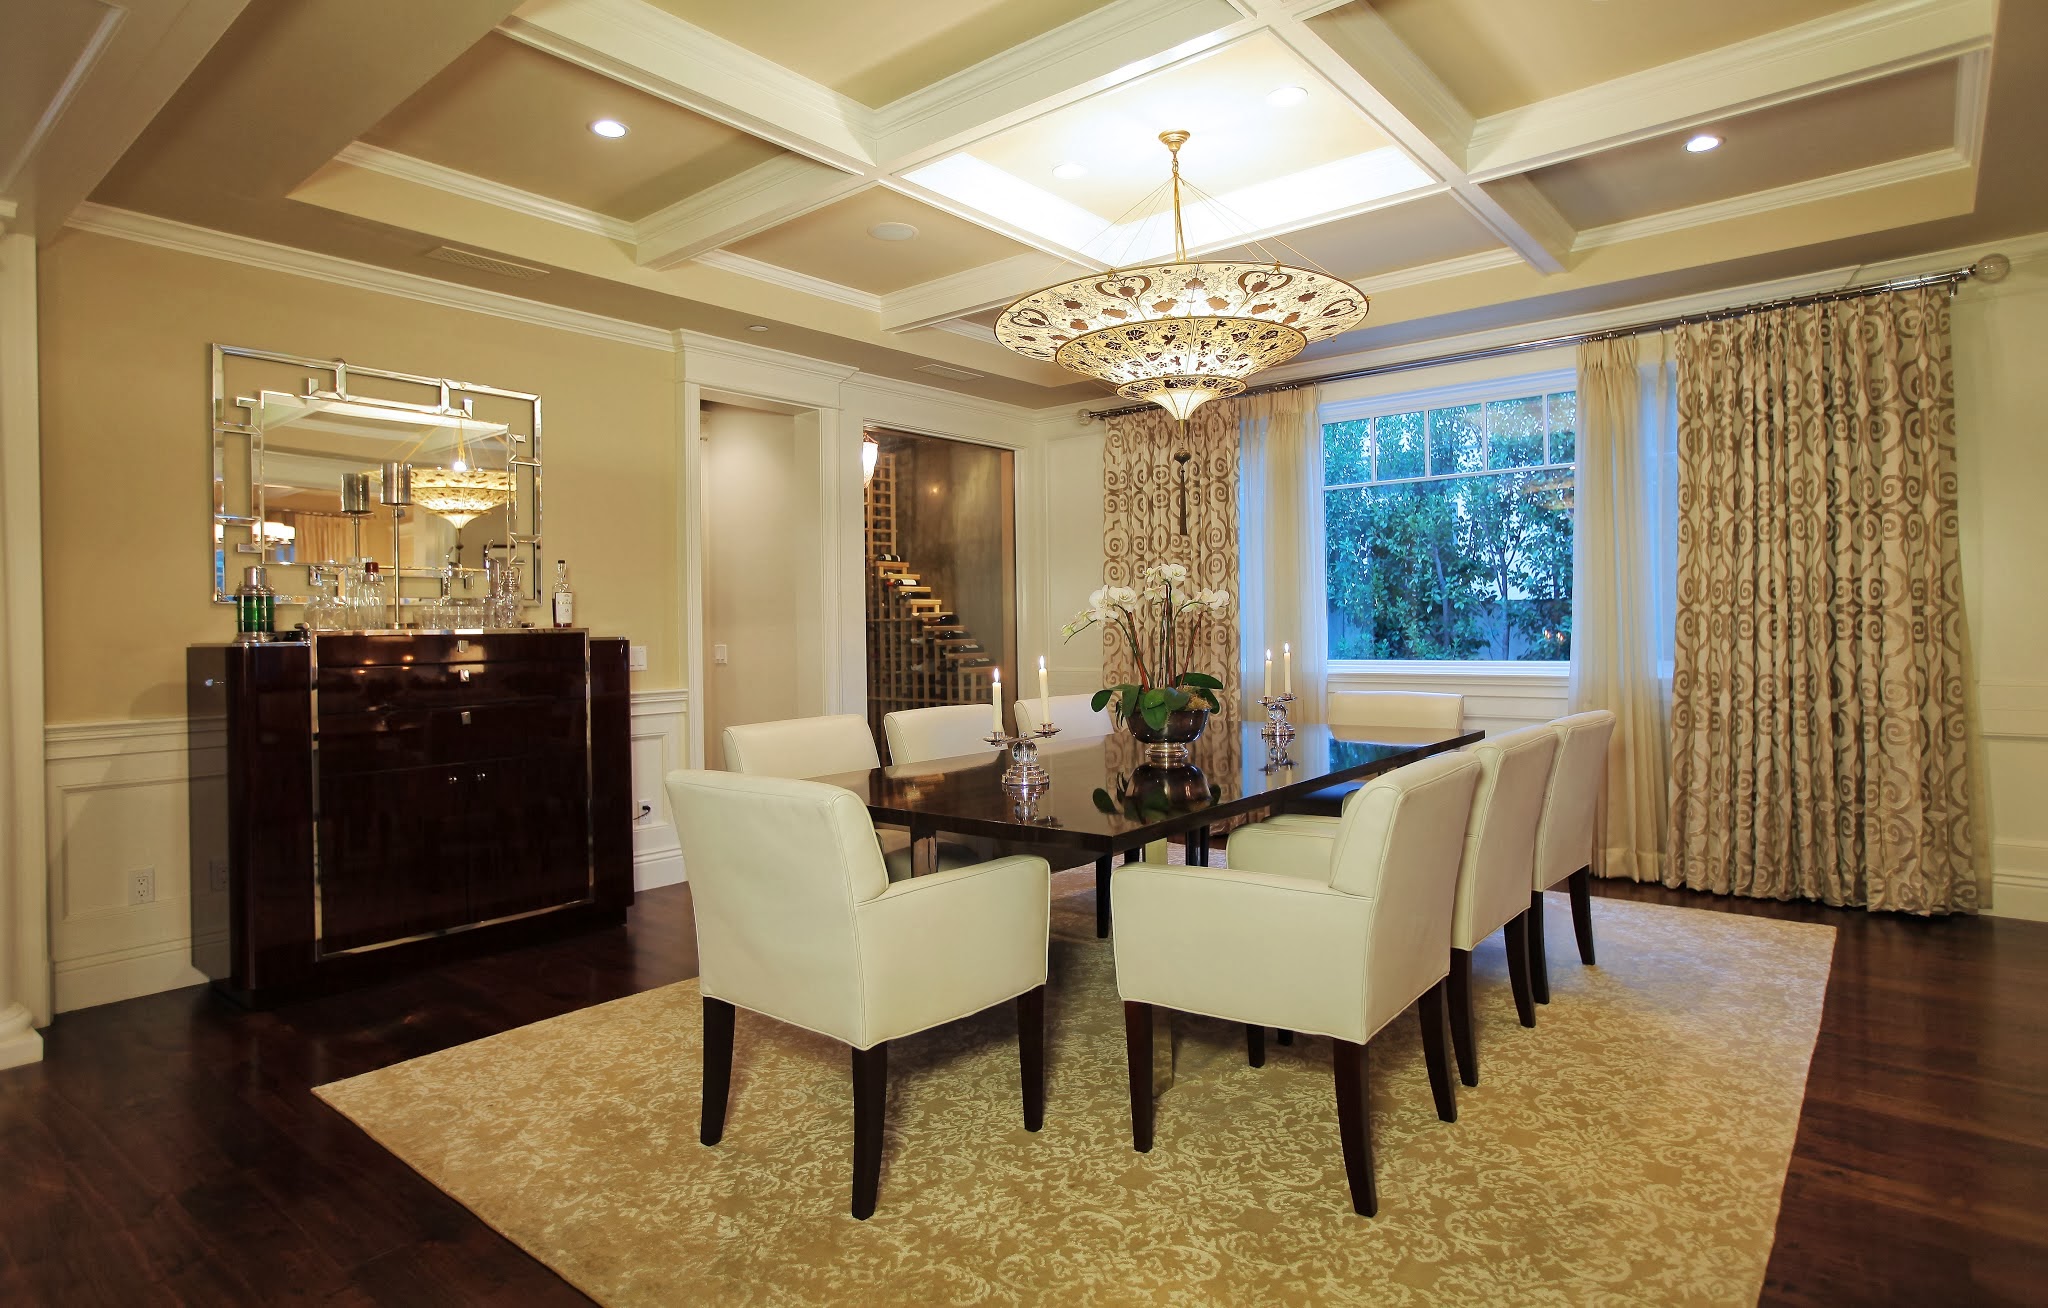 Ceiling Designs For Small Dining Room